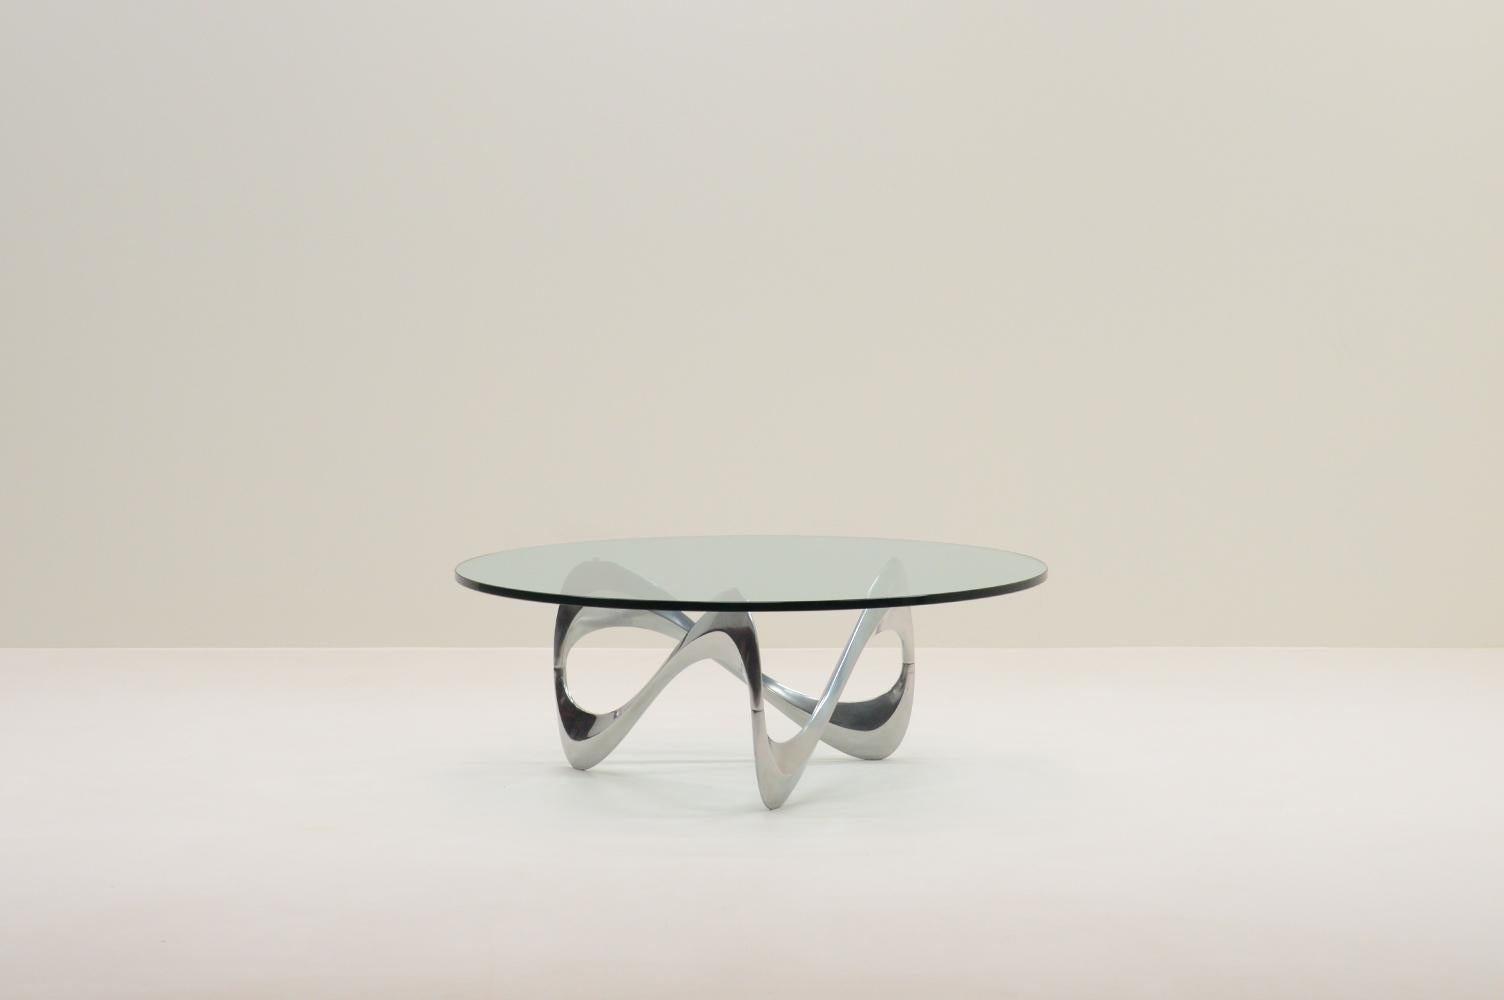 Snake coffee table by Knut Hesterberg for Ronald Schmitt, 1960s Germany. The sculptural base of the table is made of polished aluminum with a thick glass top. Knut Hesterberg was known for his minimalist, functional approach to design. His furniture